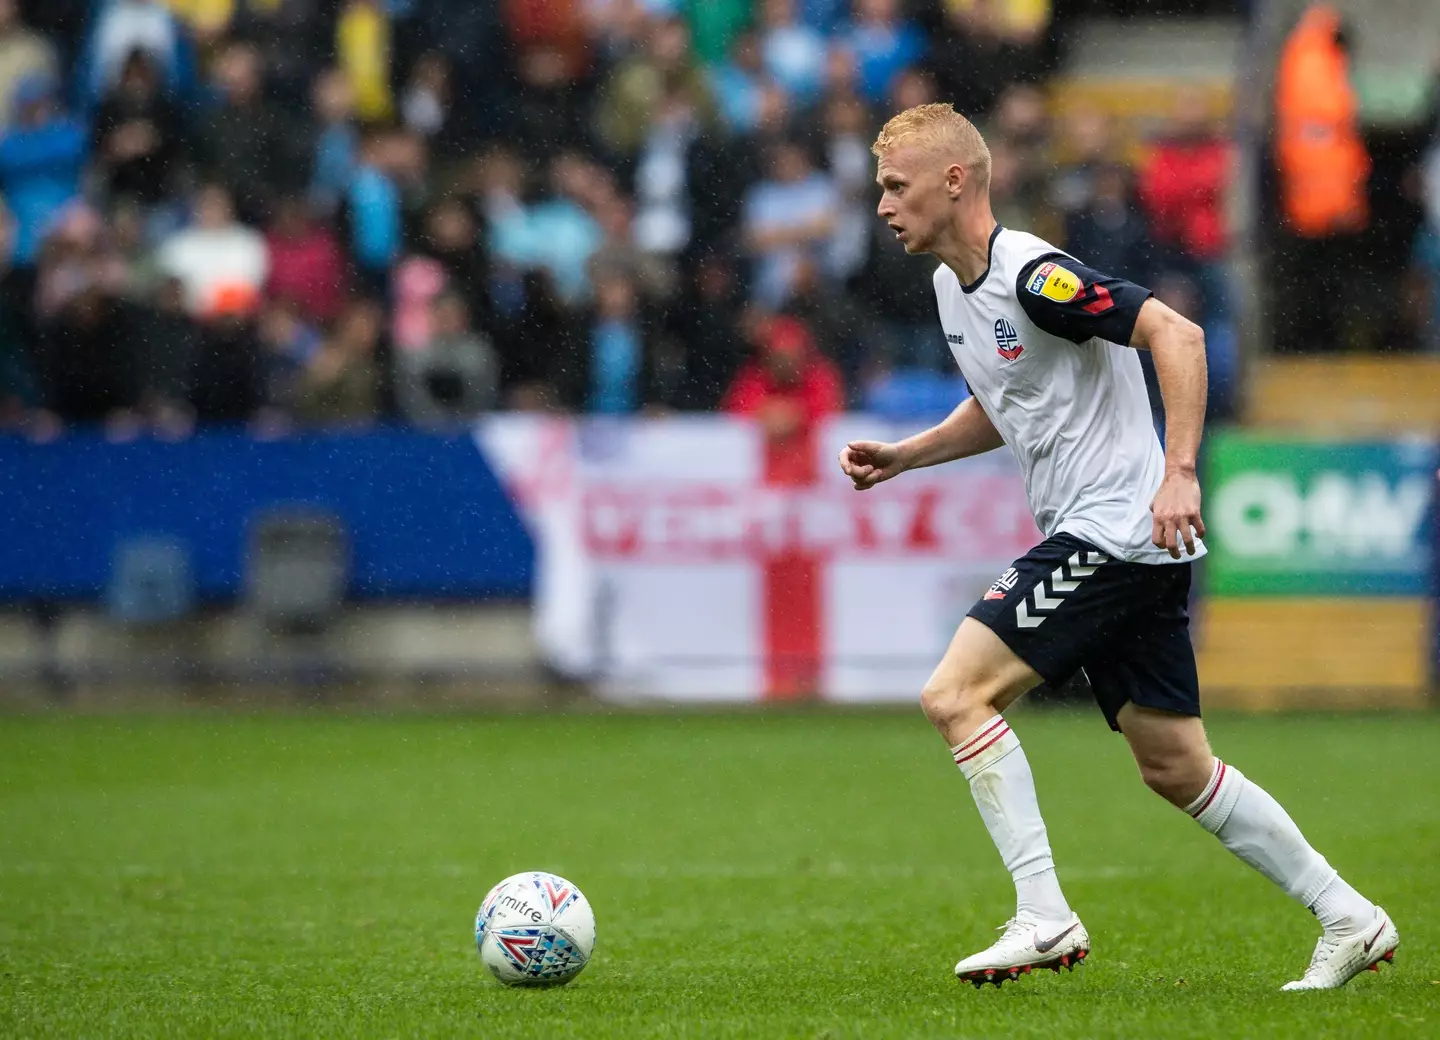 James Weir spent time at Bolton Wanderers after leaving Man United (